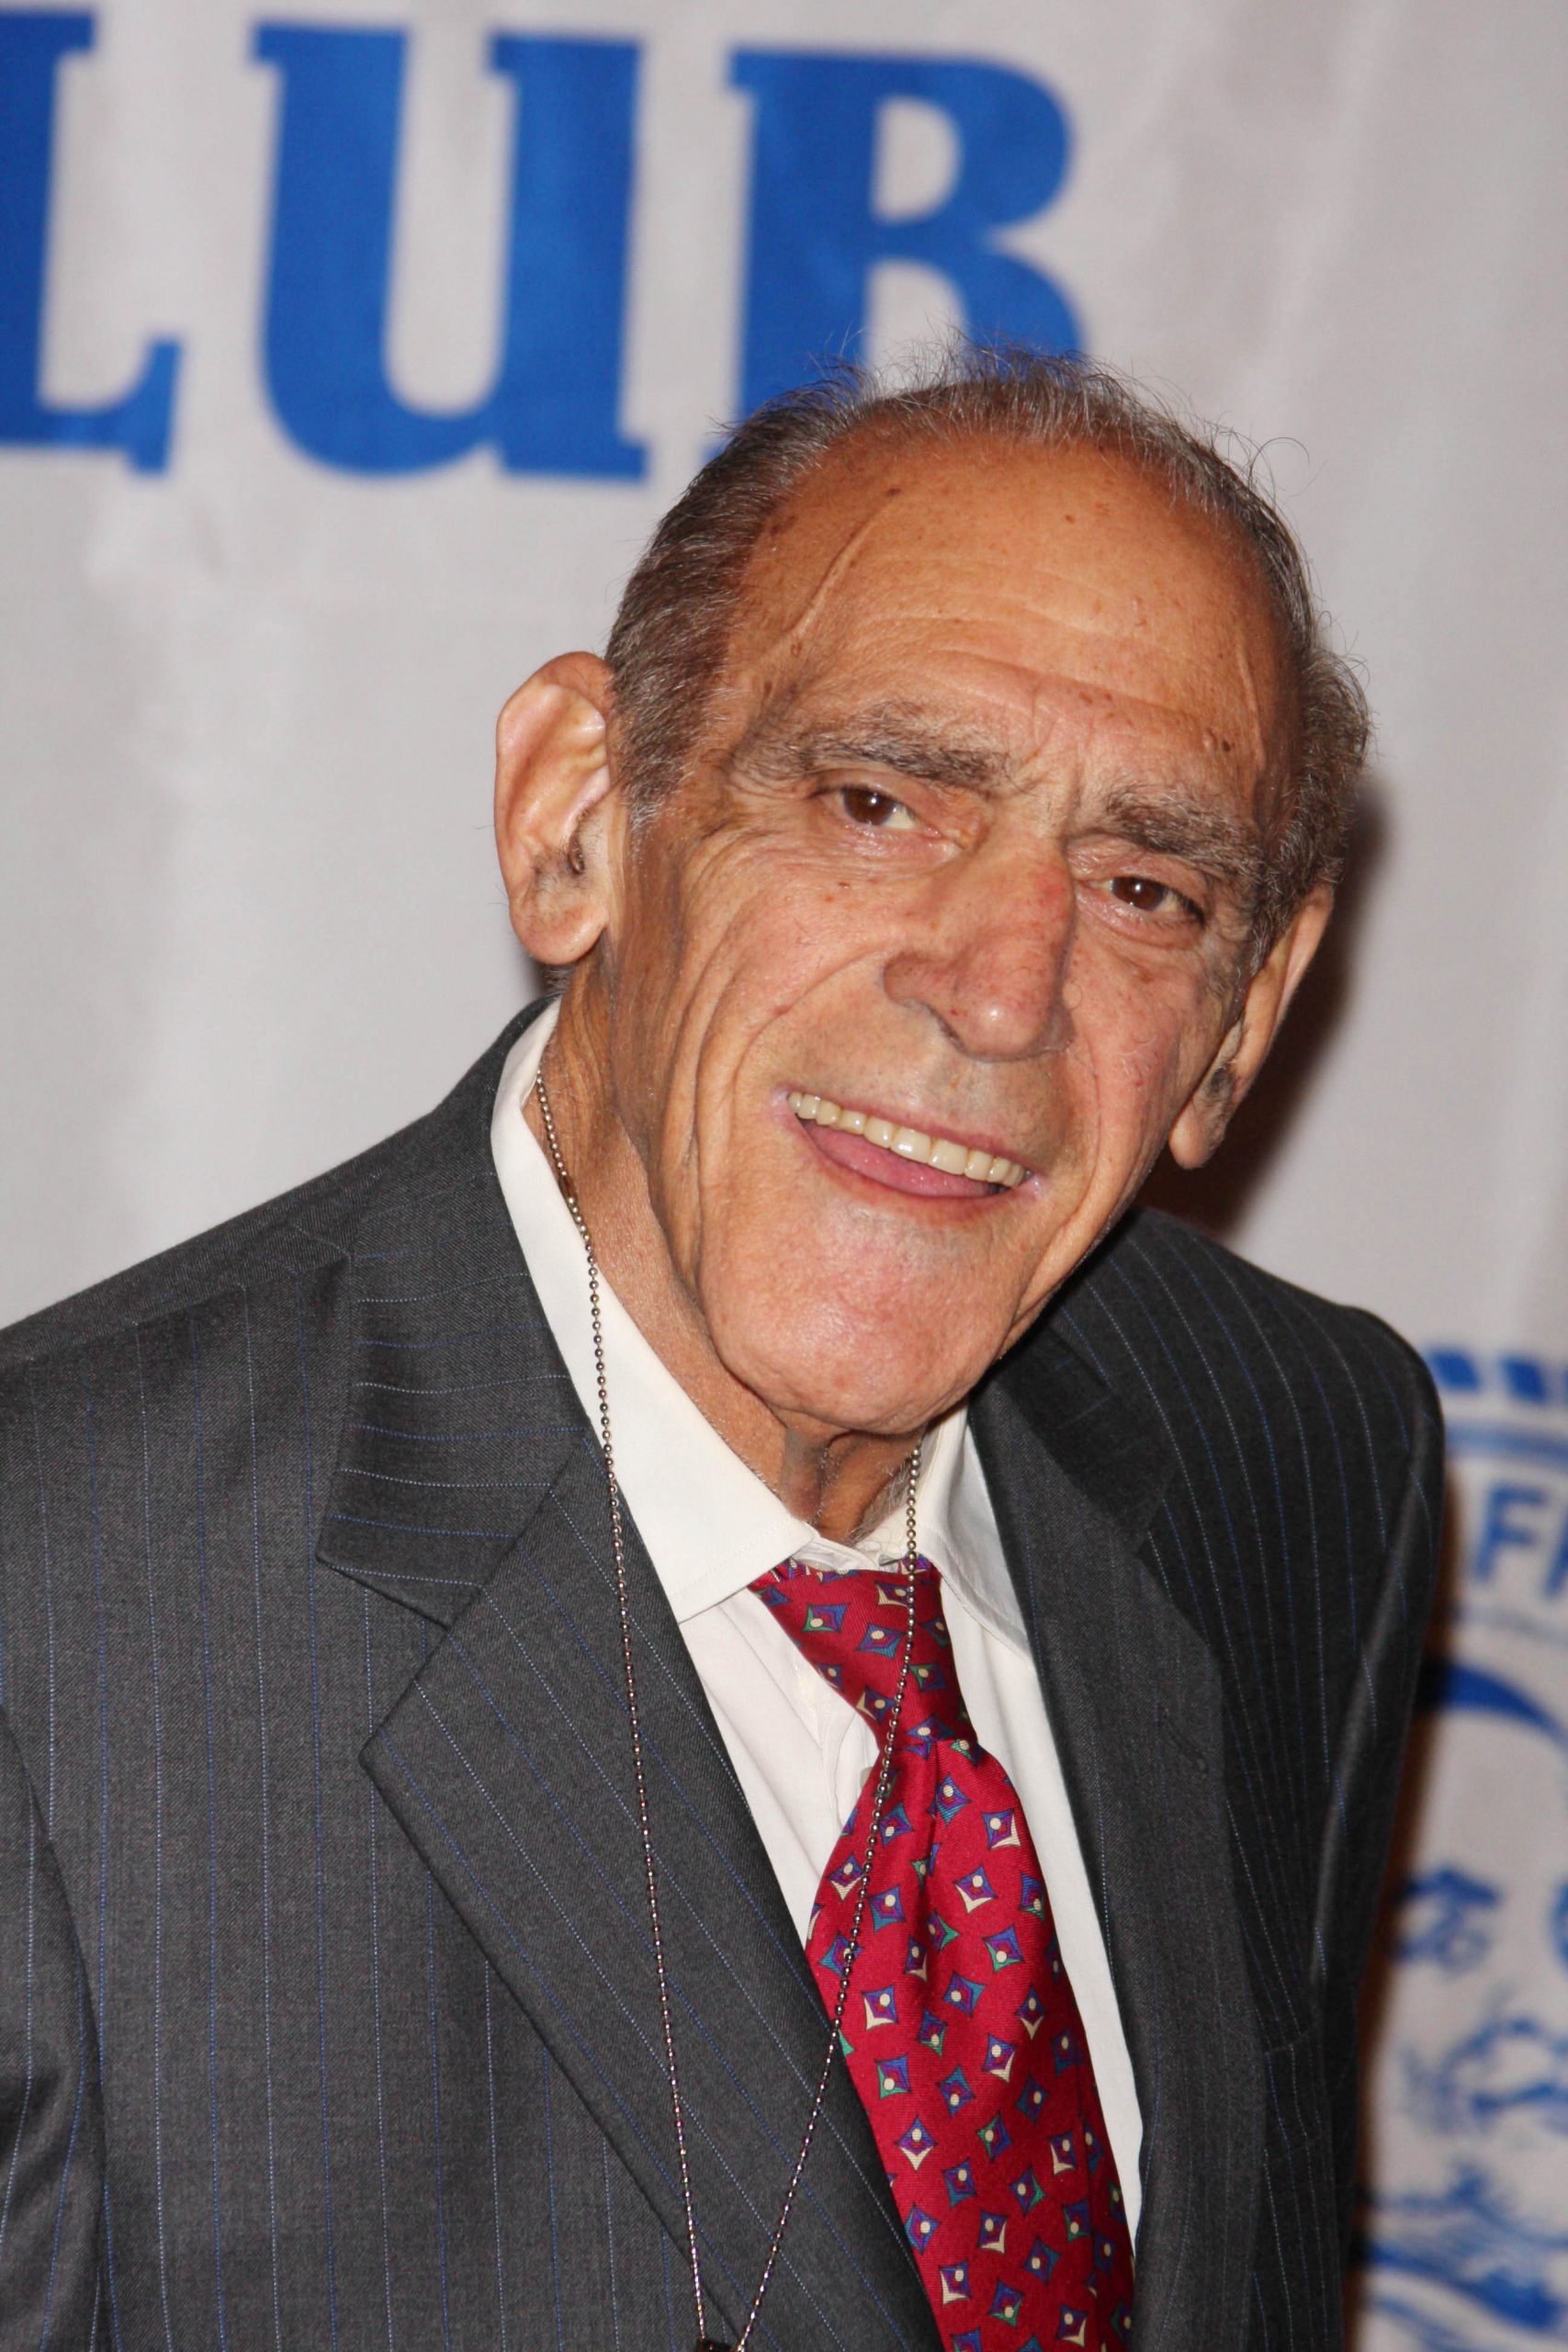 Abe Vigoda took his own death hoax and made a decades-long joke about it